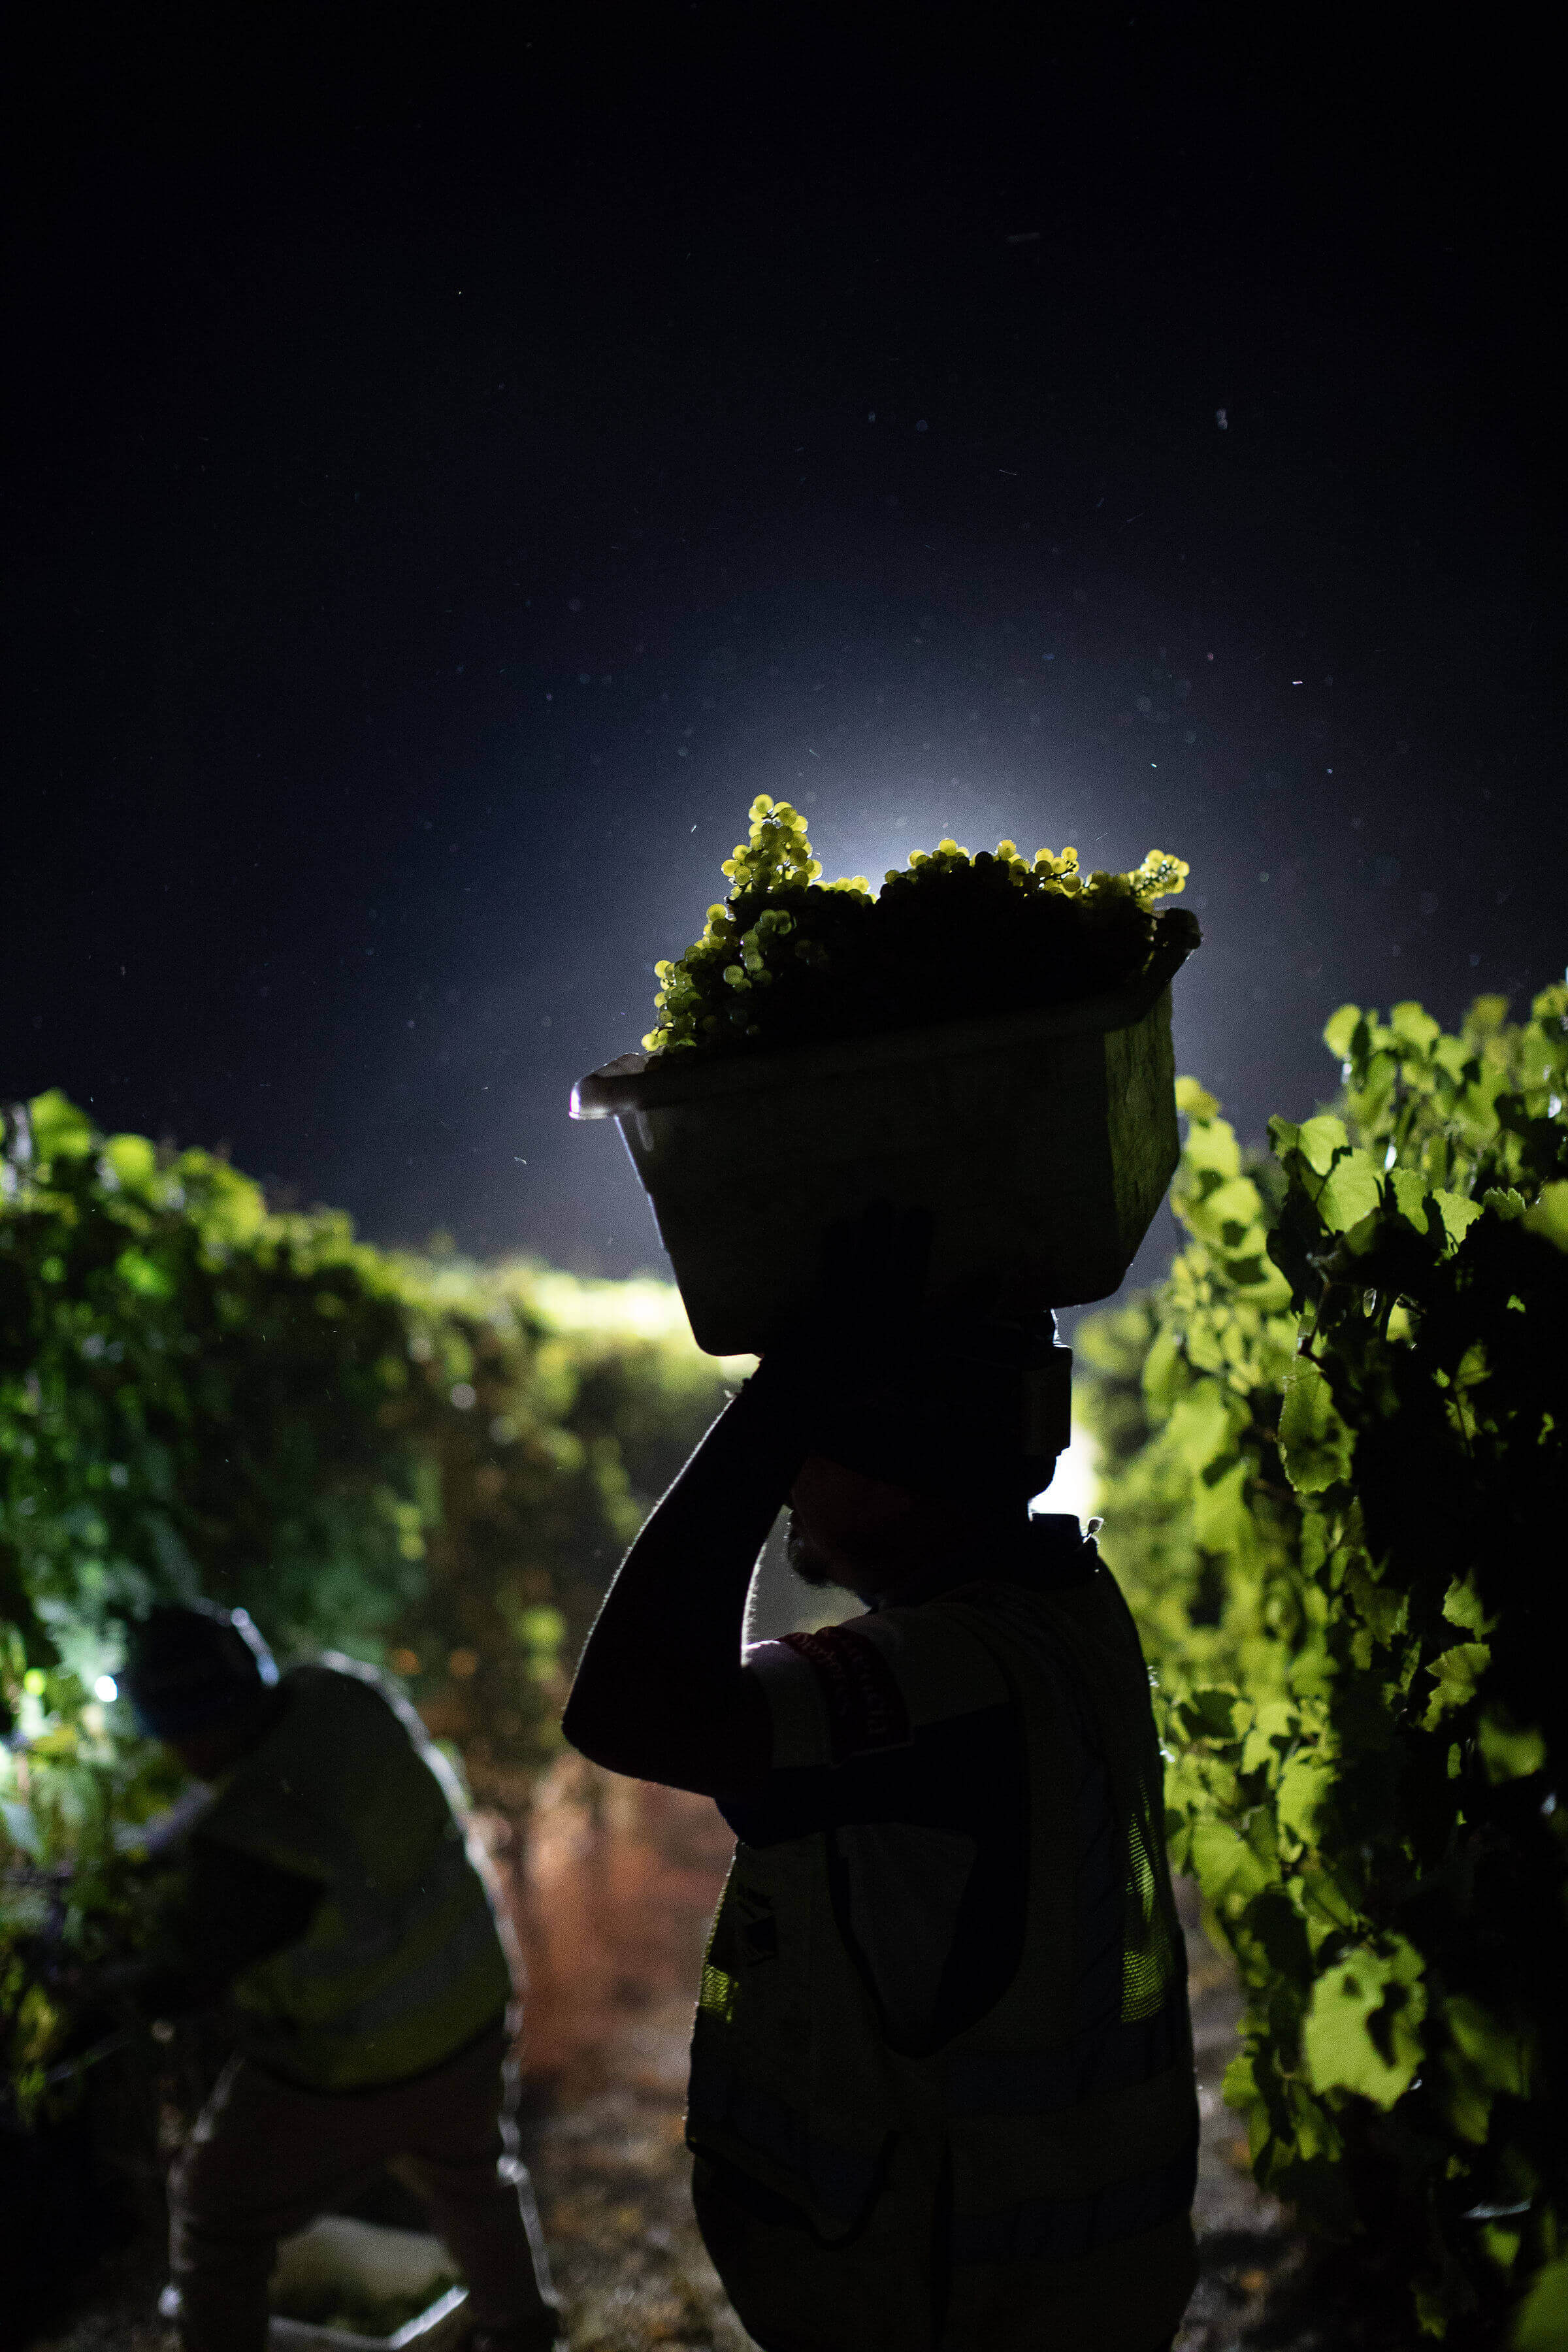 Person Picking Harvest of Grapes Over Head in the Moonlight